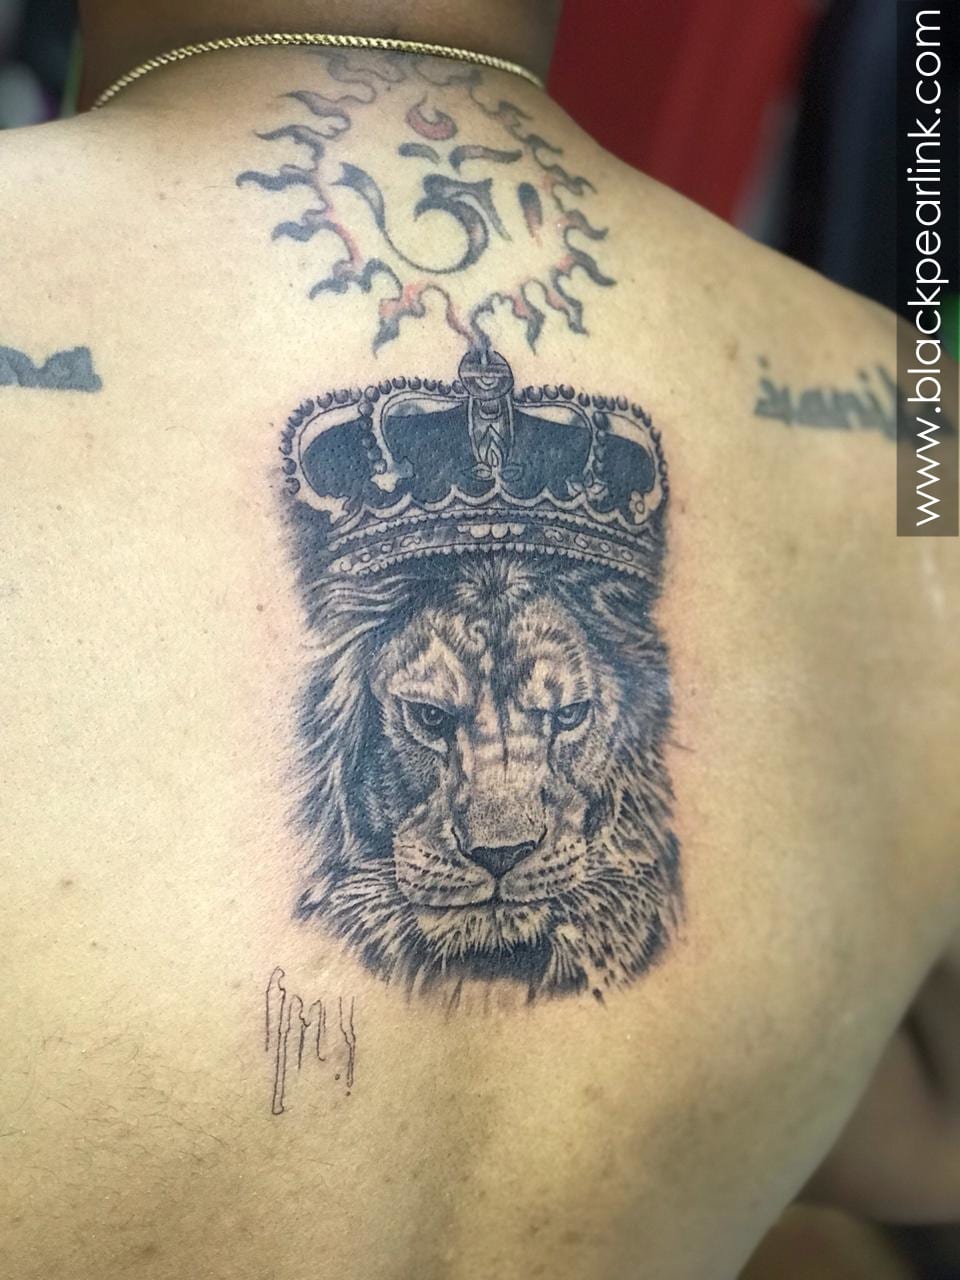 Top 5 Lion tattoos: the king of the jungle